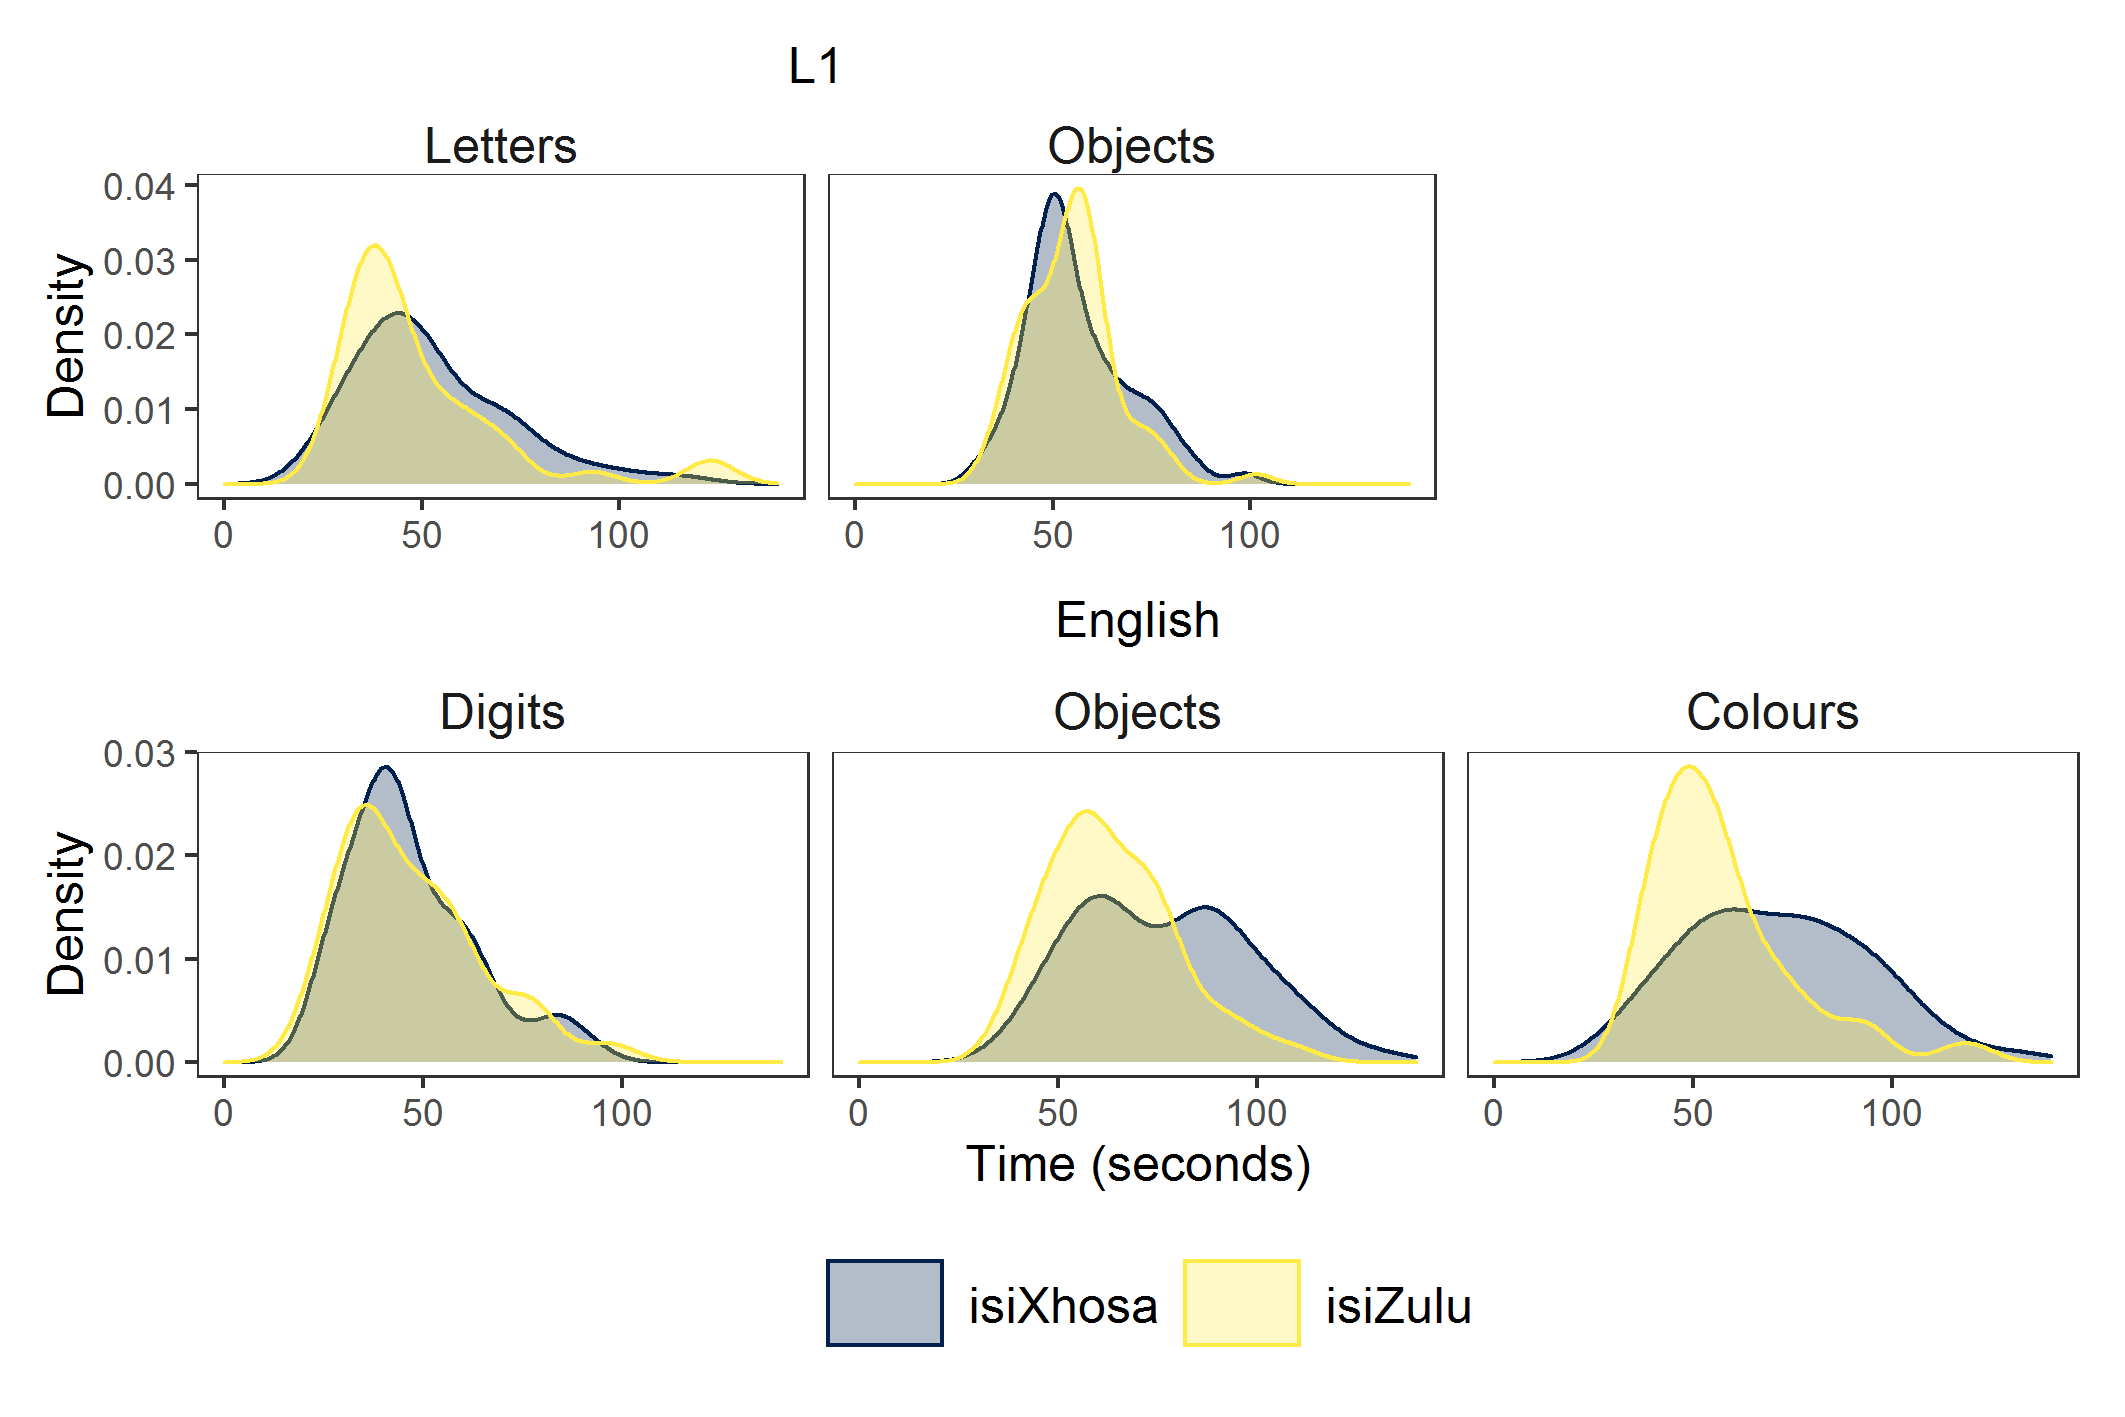 Density plots for RAN tasks in L1 (top) and English (bottom) per language group